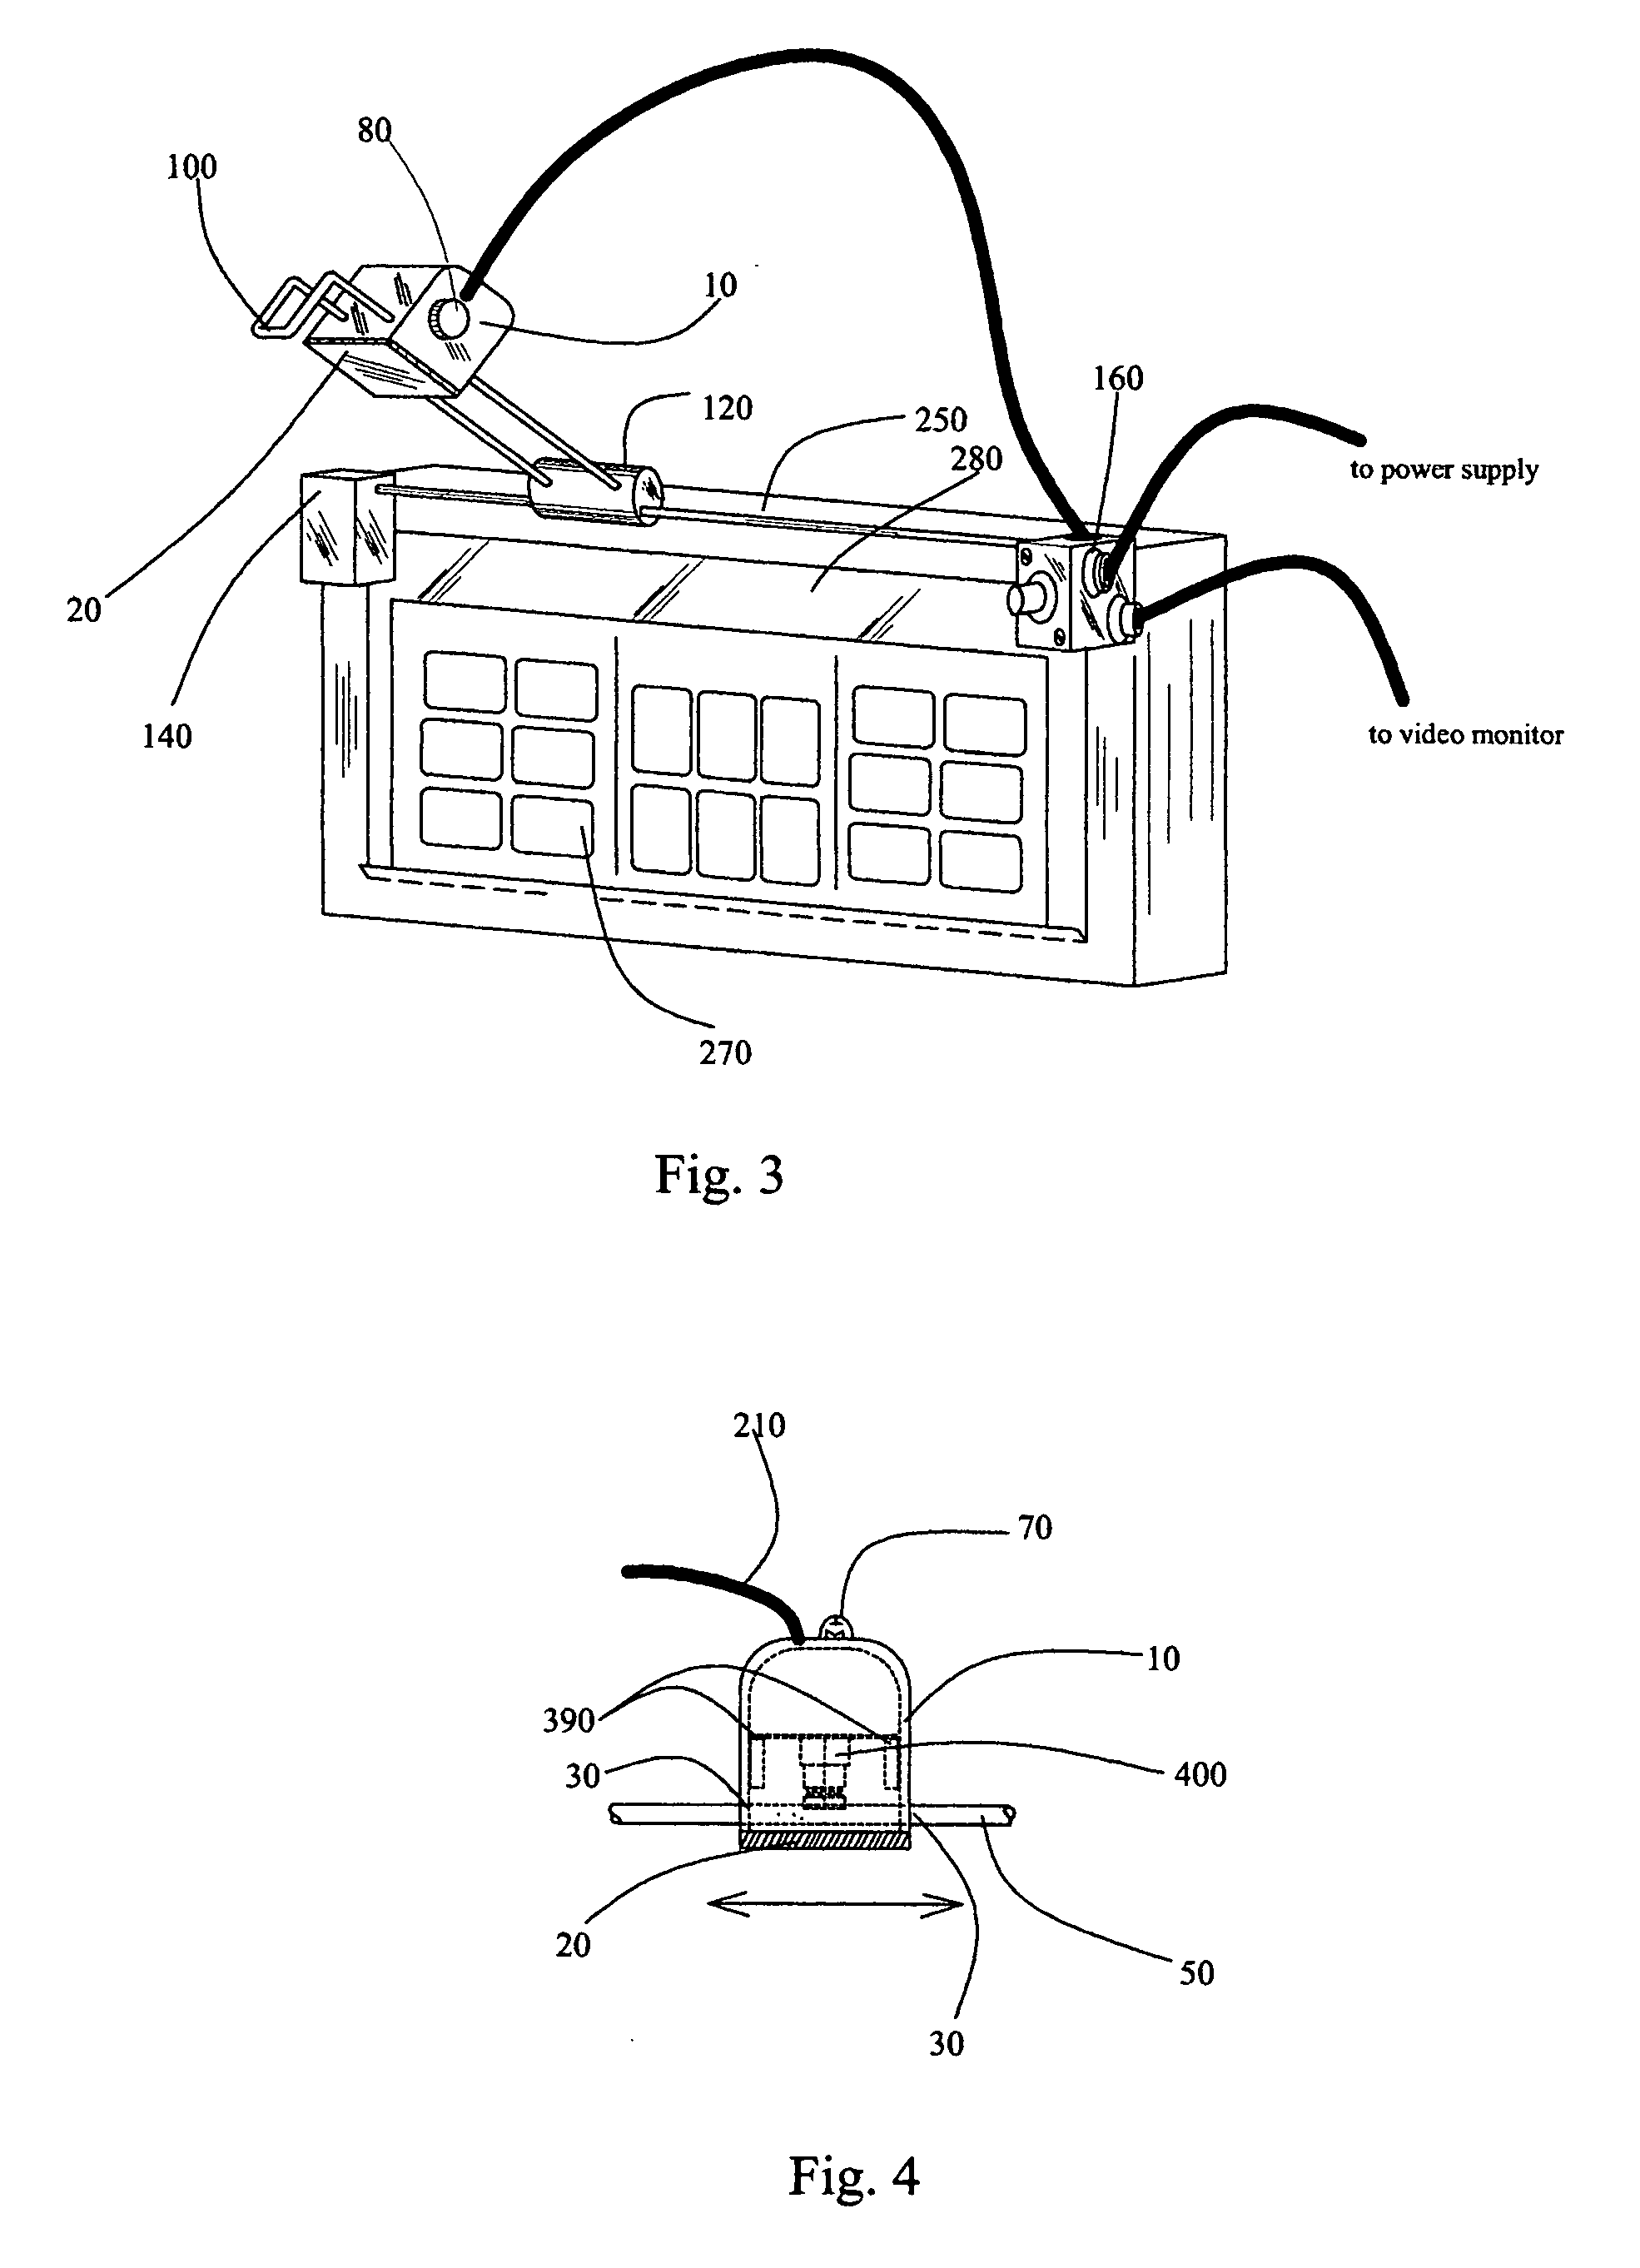 Apparatus for converting a standard dental x-ray viewbox into an analog or digital viewing system